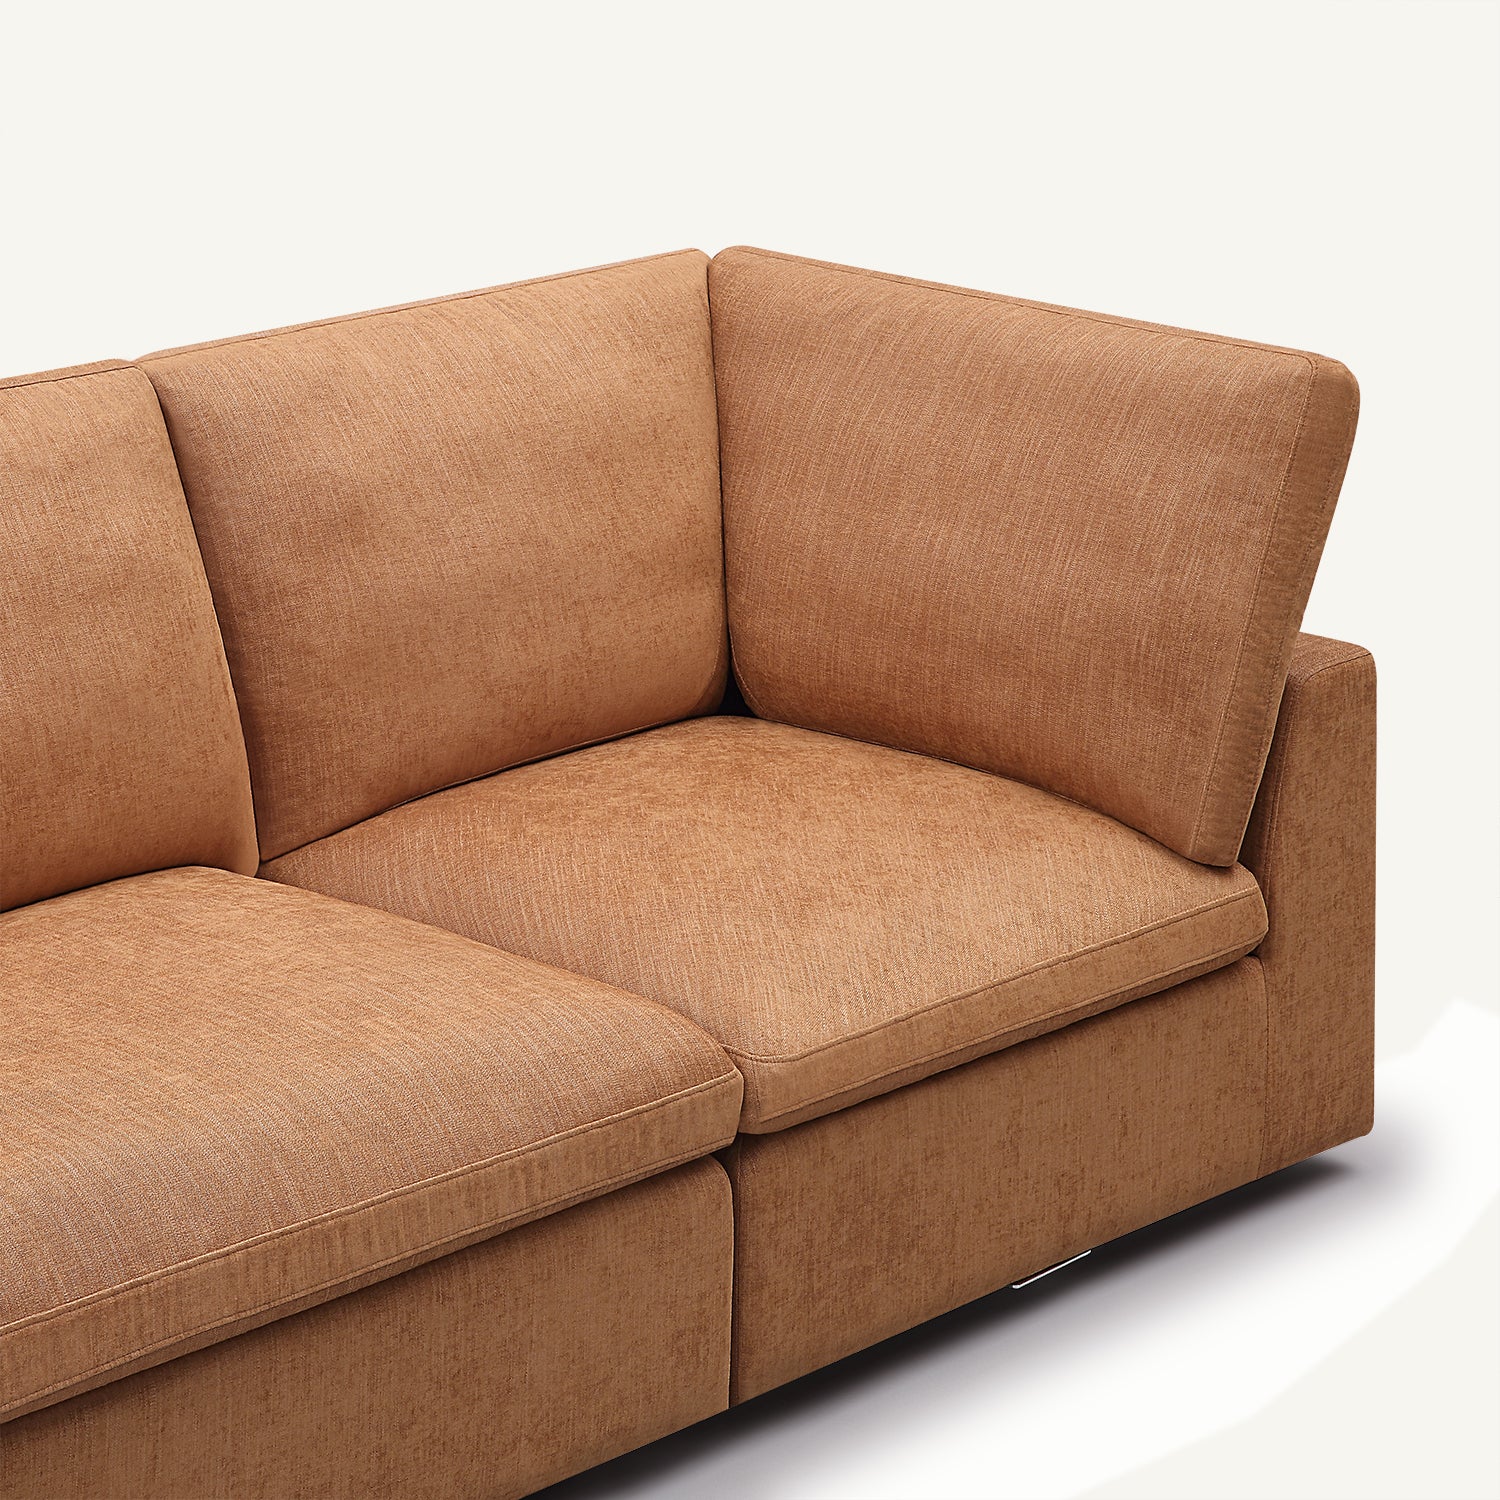 Cloud Tan Linen 6-seat Sofa with Double Ottomans